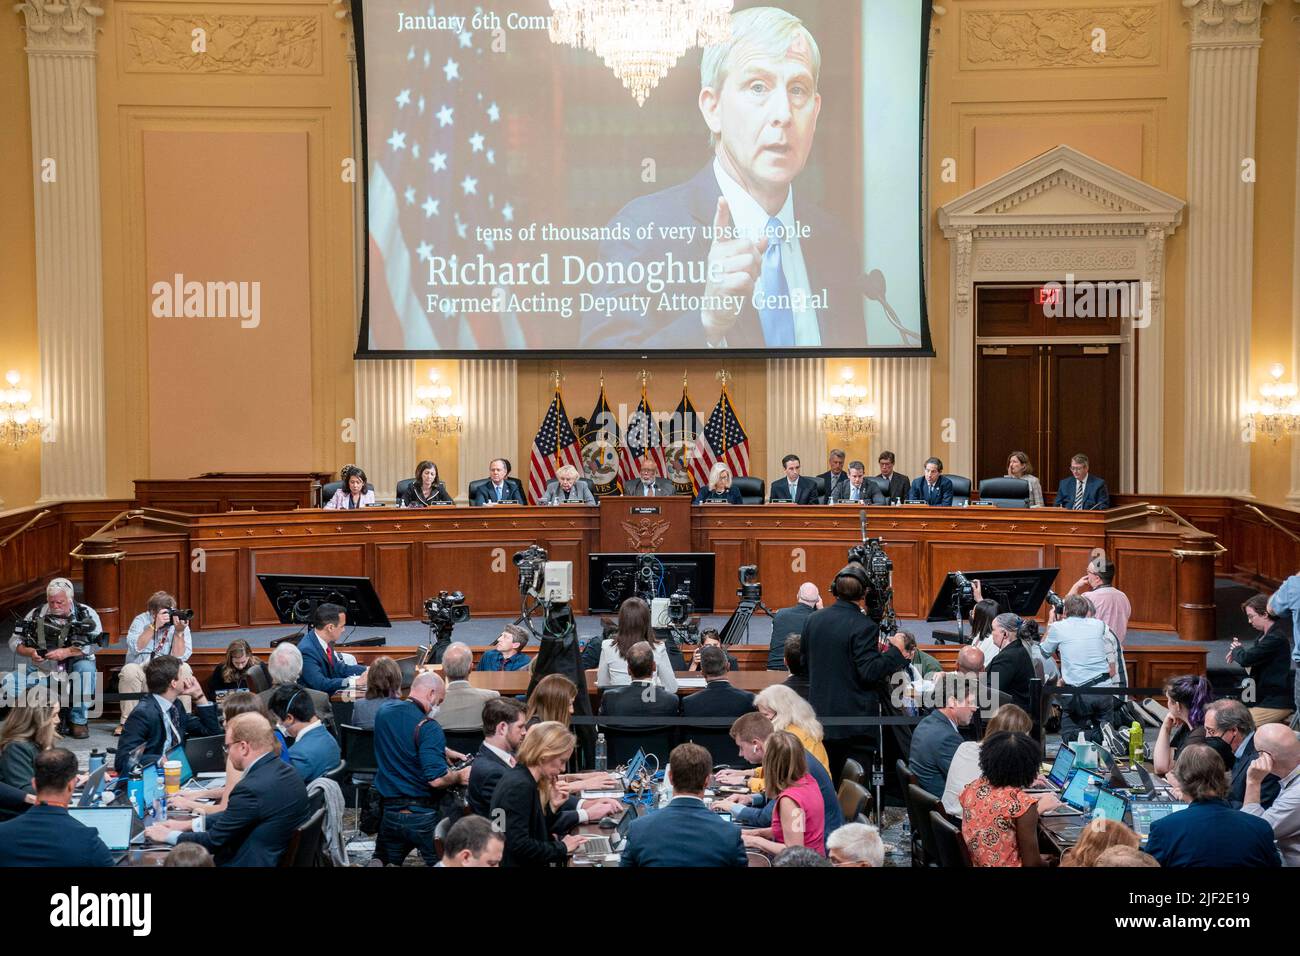 Washington, US, June 28, 2022, A photo of Richard Donoghue, former acting Deputy Attorney General, is displayed as Cassidy Hutchinson, former Special Assistant to President Trump, testifies during the sixth public hearing by the House Select Committee to Investigate the January 6th Attack on the U.S. Capitol on June 28, 2022 in Washington, DC, USA. Cassidy Hutchinson, top aide to former White House chief of staff Mark Meadows was a young, fast-rising star in the Trump administration. She revealed that she heard President Donald Trump say on the morning of Jan. 6 that he knew his supporters had Stock Photo